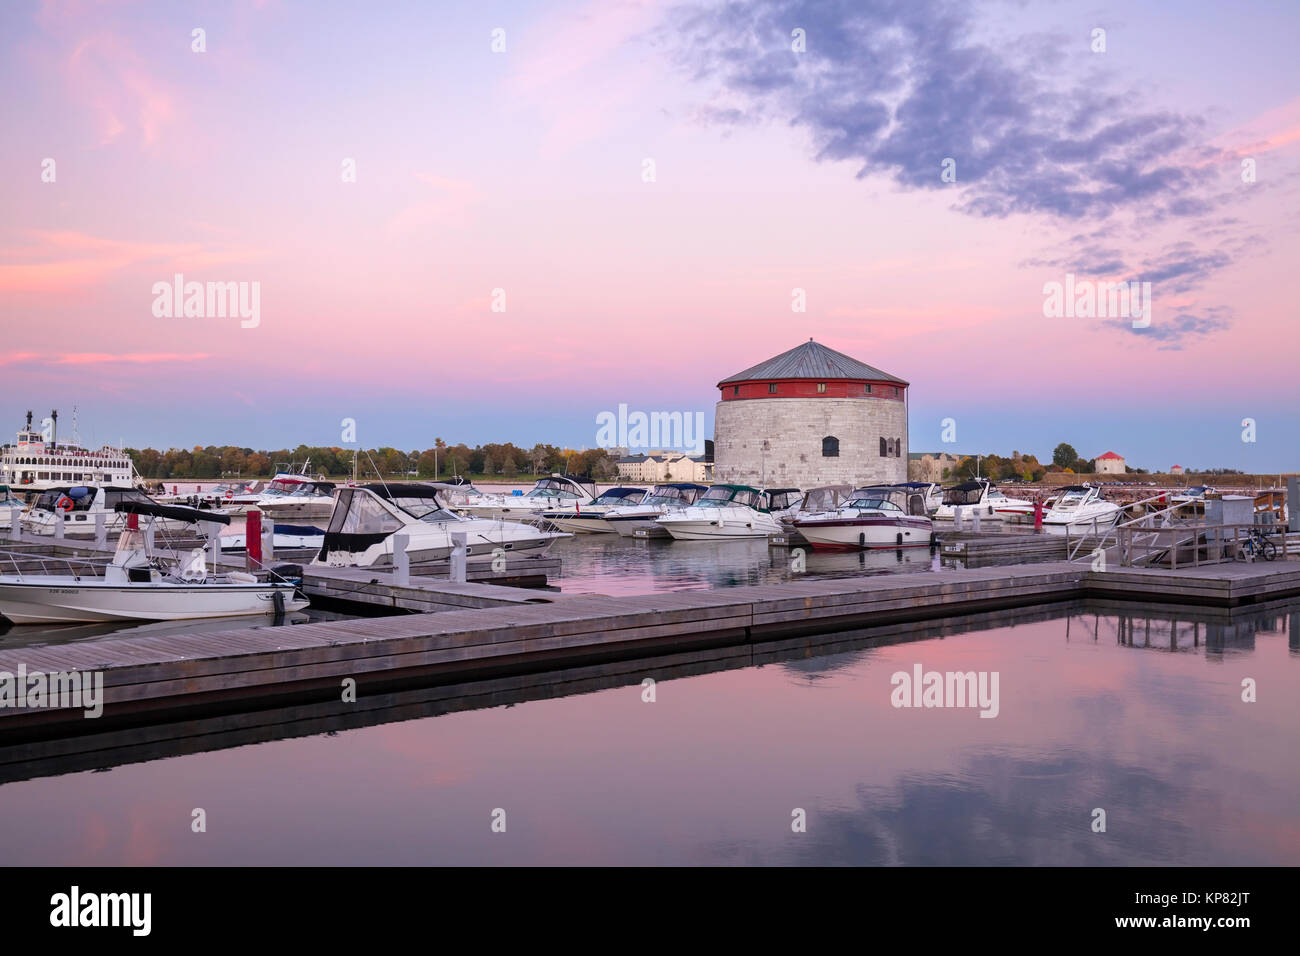 The Confederation Basin Marina and Shoal Tower which is a World War 2 Martello Tower on the St. Lawrence River at sunset in Kingston, Ontario, Canada. Stock Photo